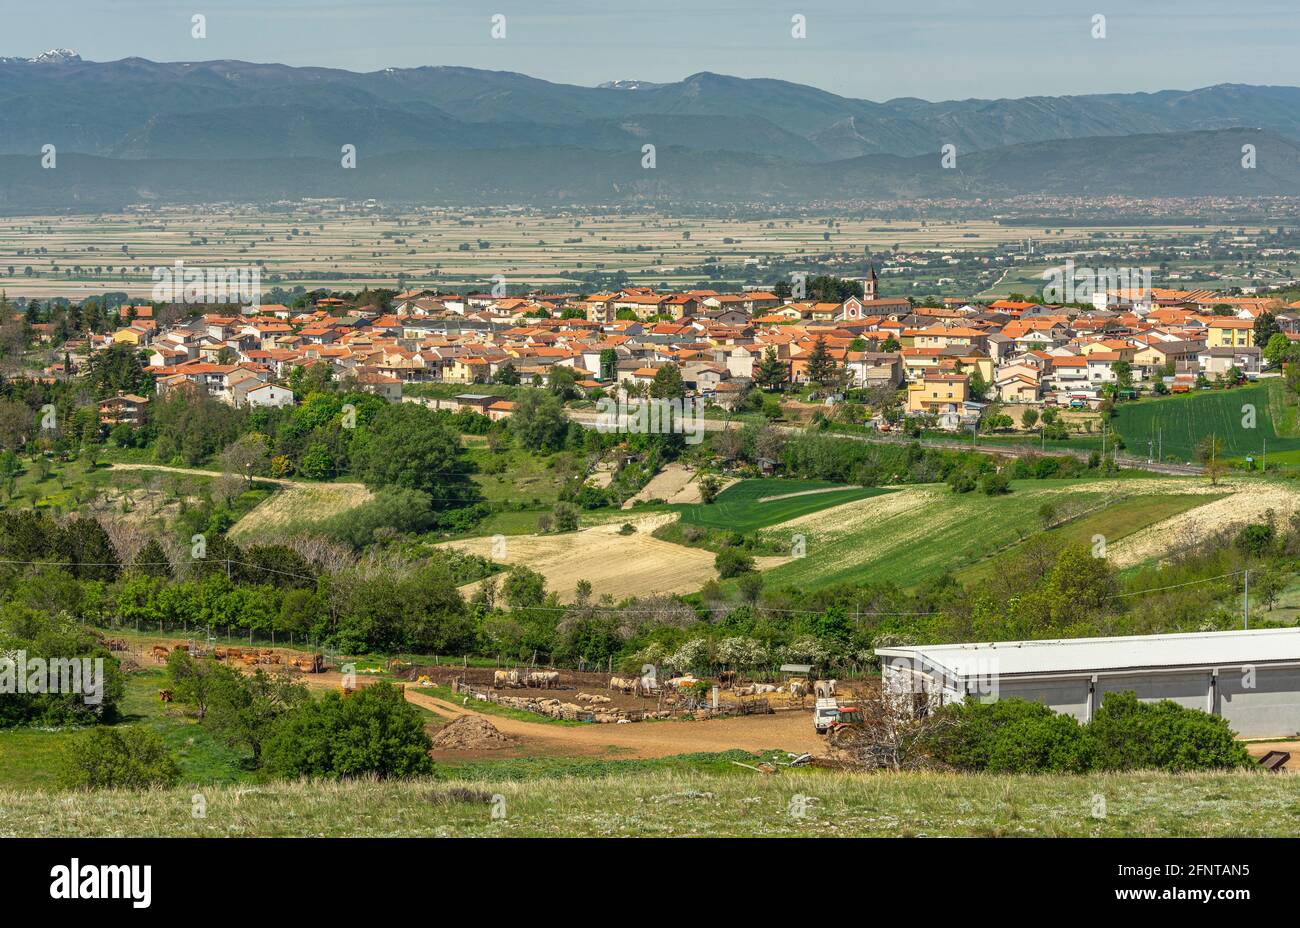 Top view of the new town of Collarmele, rebuilt after the 1915 earthquake.  Collarmele, province of L'Aquila, Abruzzo, Italy, Europe Stock Photo - Alamy